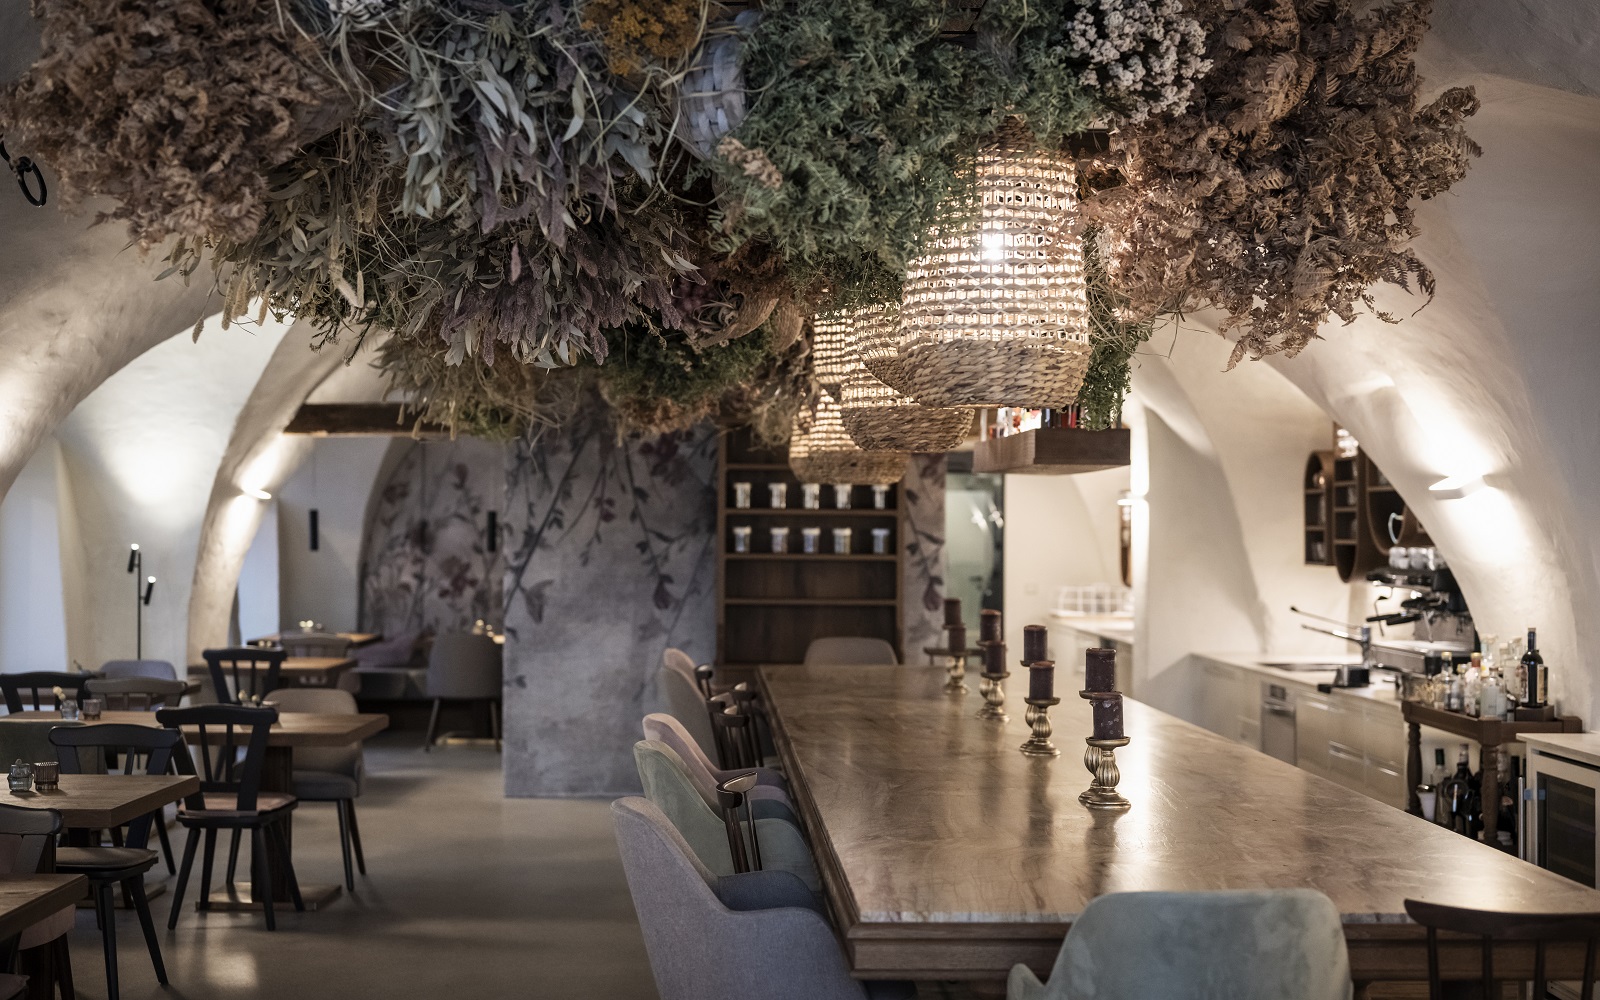 flowers from the ceiling make a statement in Bogen bistro by noa*